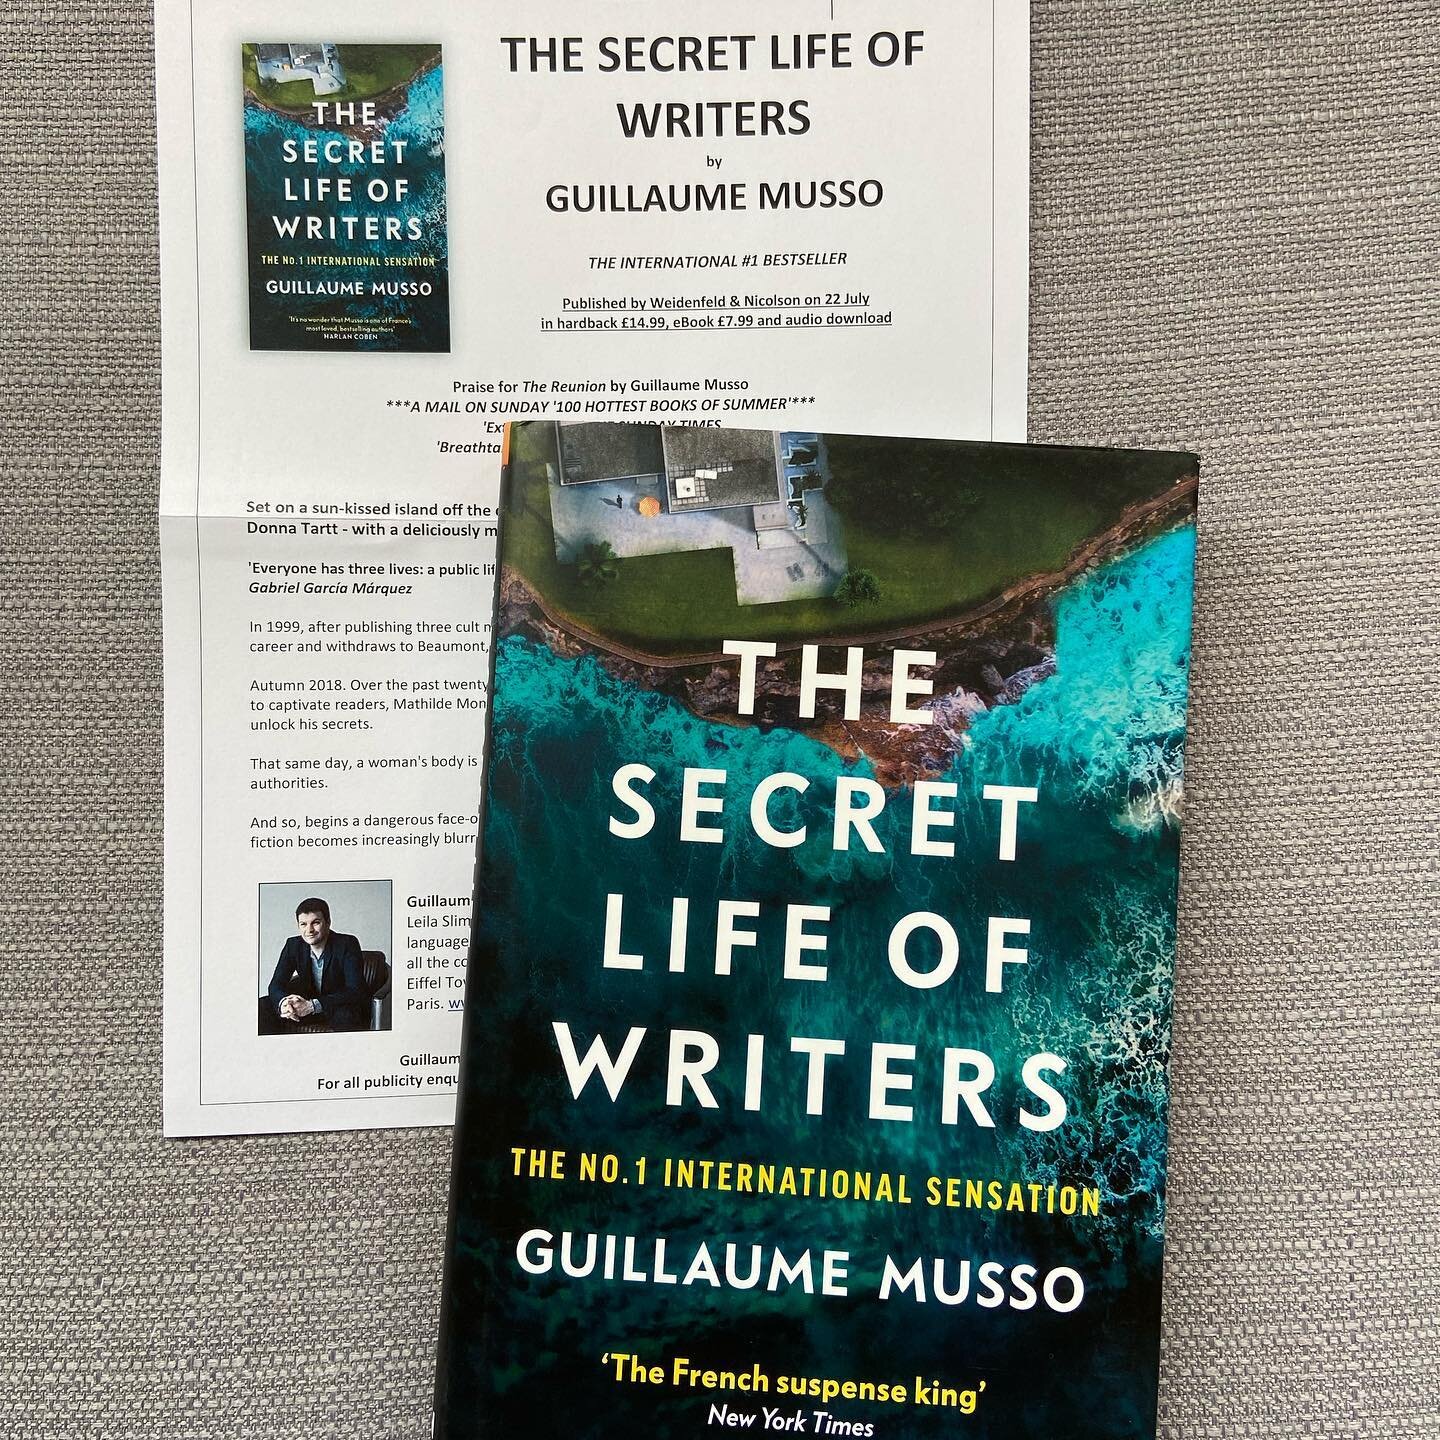 Big thanks to @alexxlayt for #TheSecretLifeofWriters! I&rsquo;m obsessed with the cover and I love reading about writers so I can&rsquo;t wait to get stuck in. @wnbooks